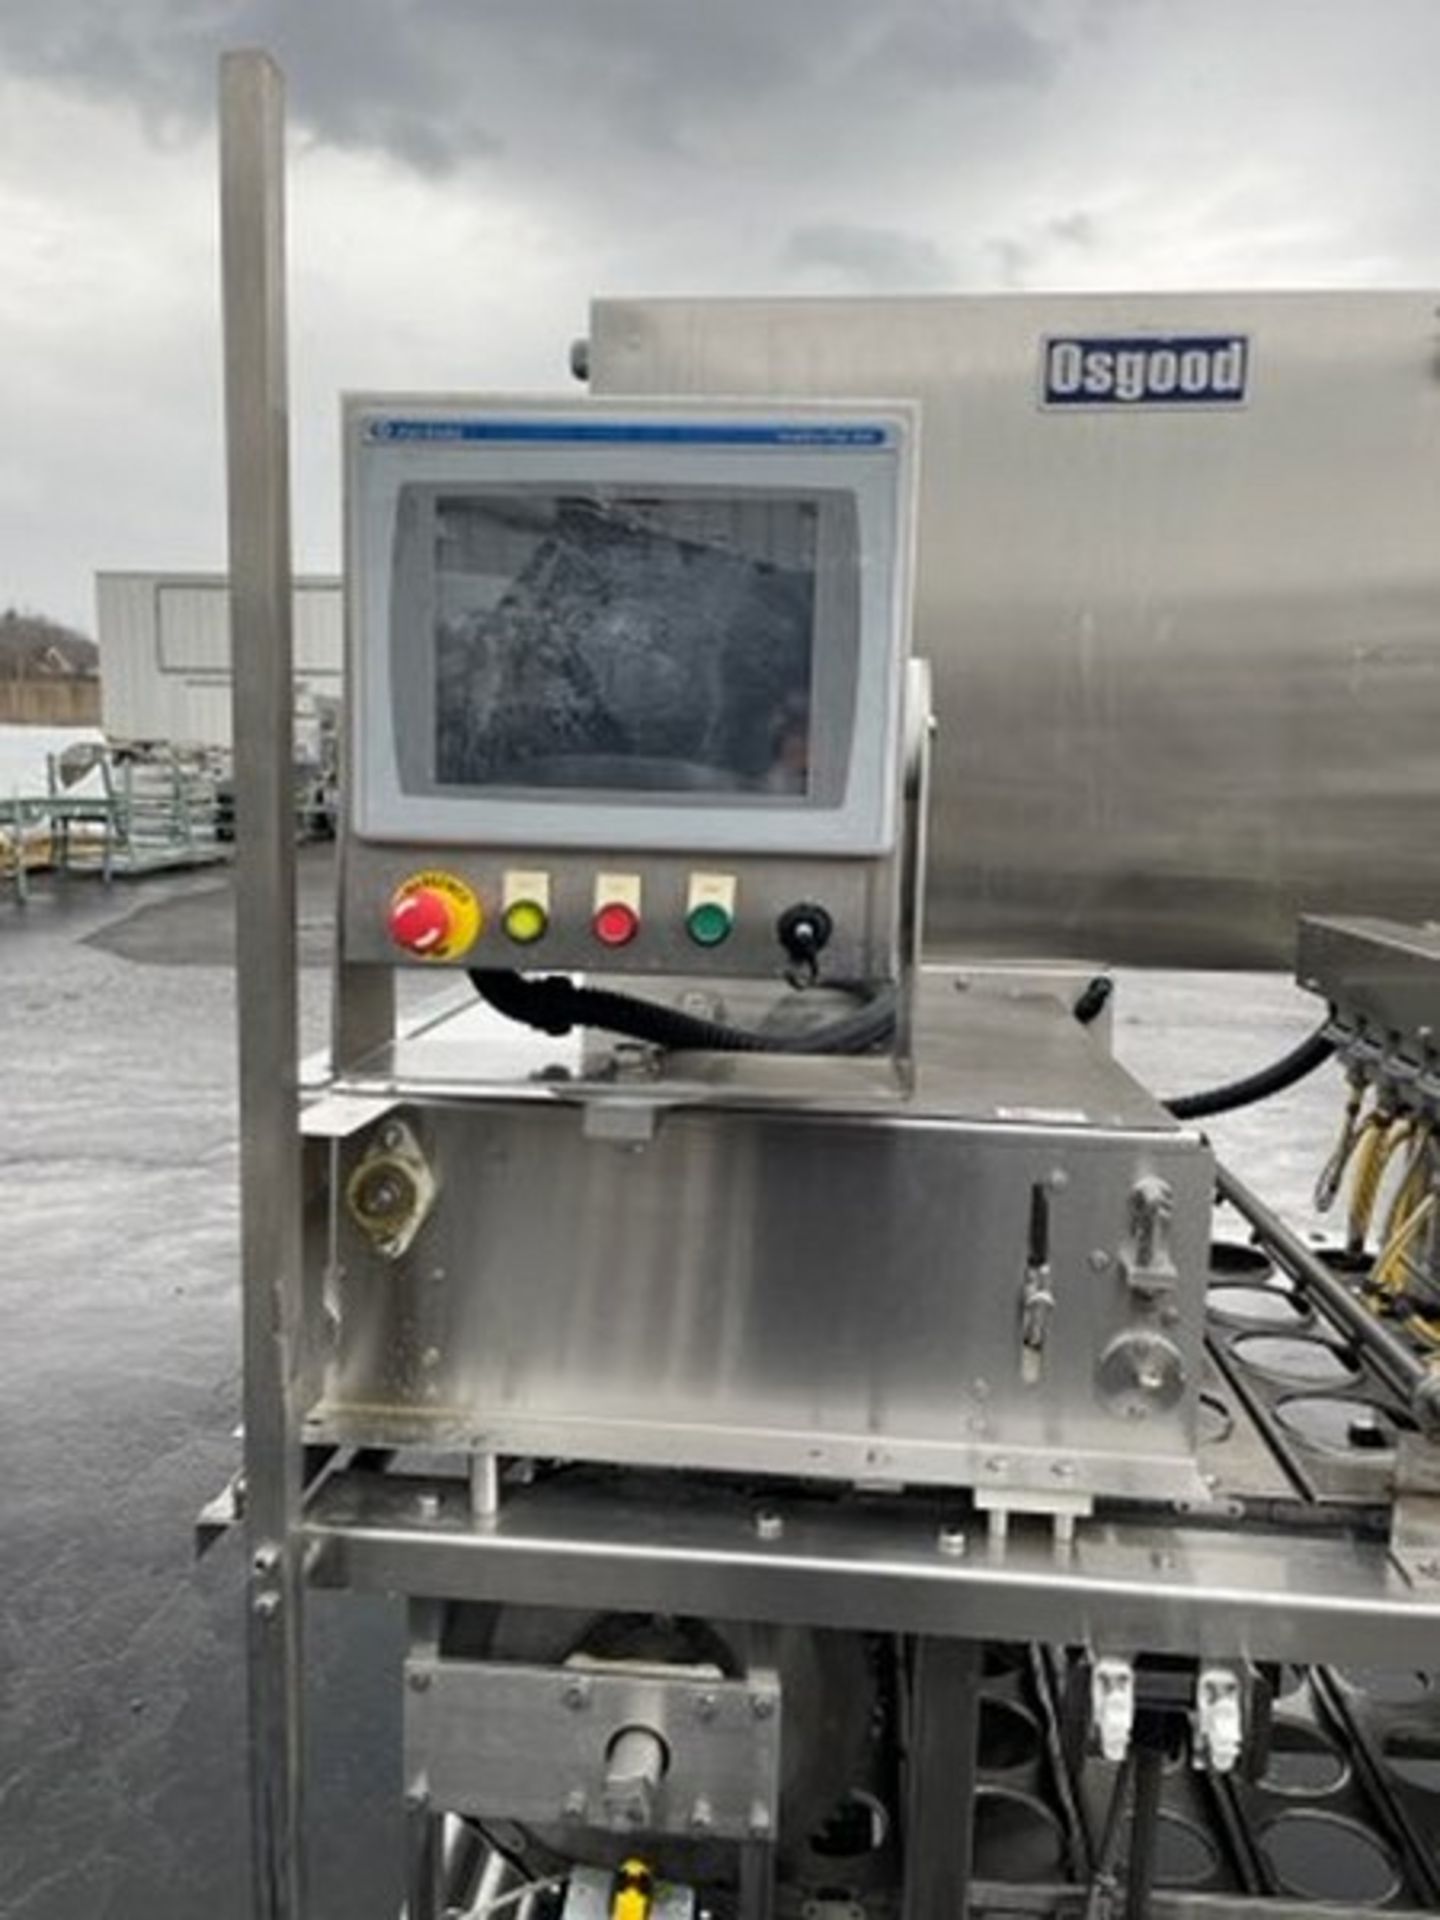 Osgood 4-Lane In-Line S/S Cup Filler,M/N 4800-E, S/N 351-840, Set Up with 3-5/8" W On-Board Change - Image 10 of 18